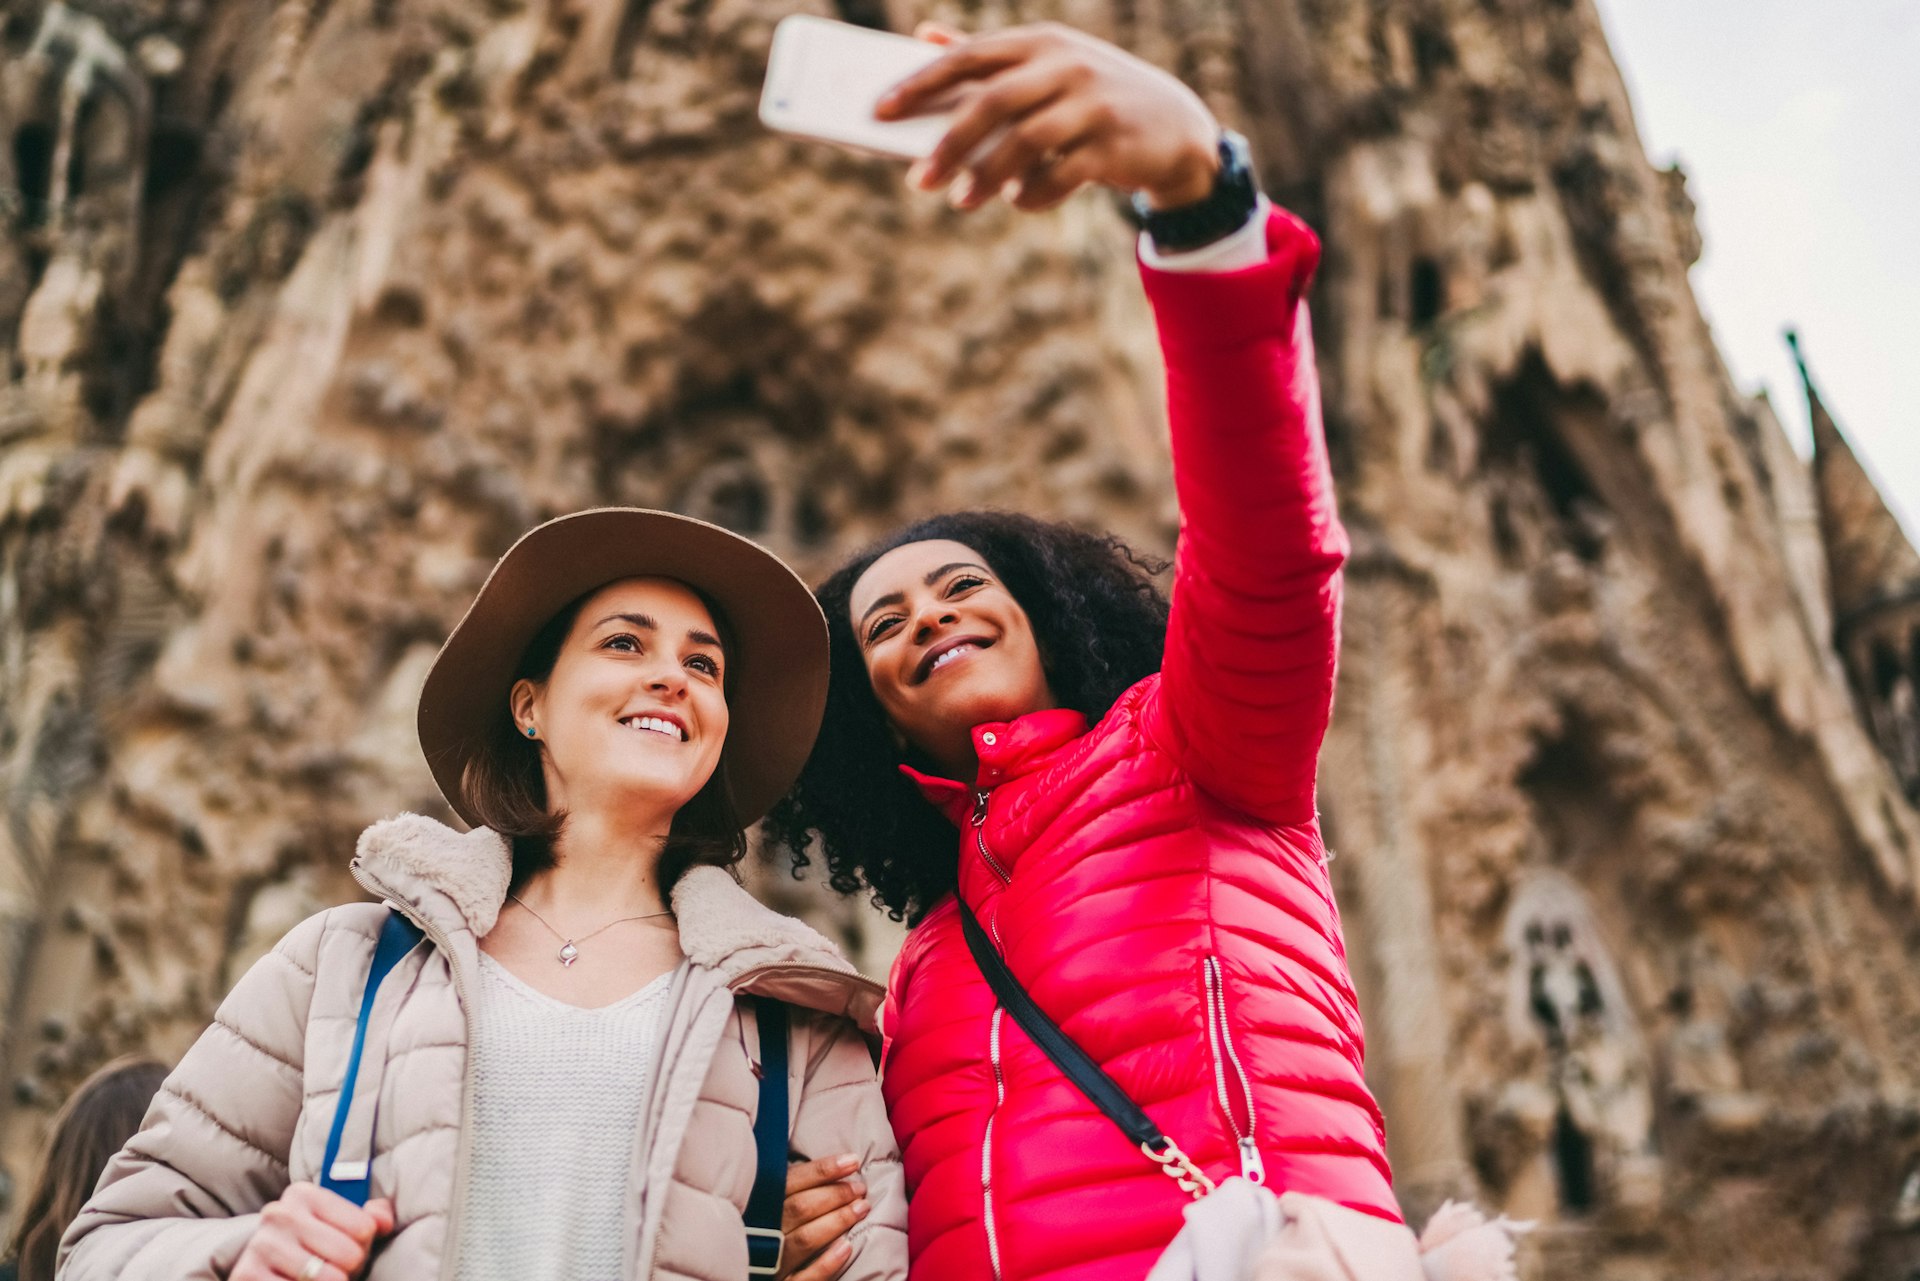 Two women stand in front of La Sagrada Familia in Barcelona taking selfies with smartphone